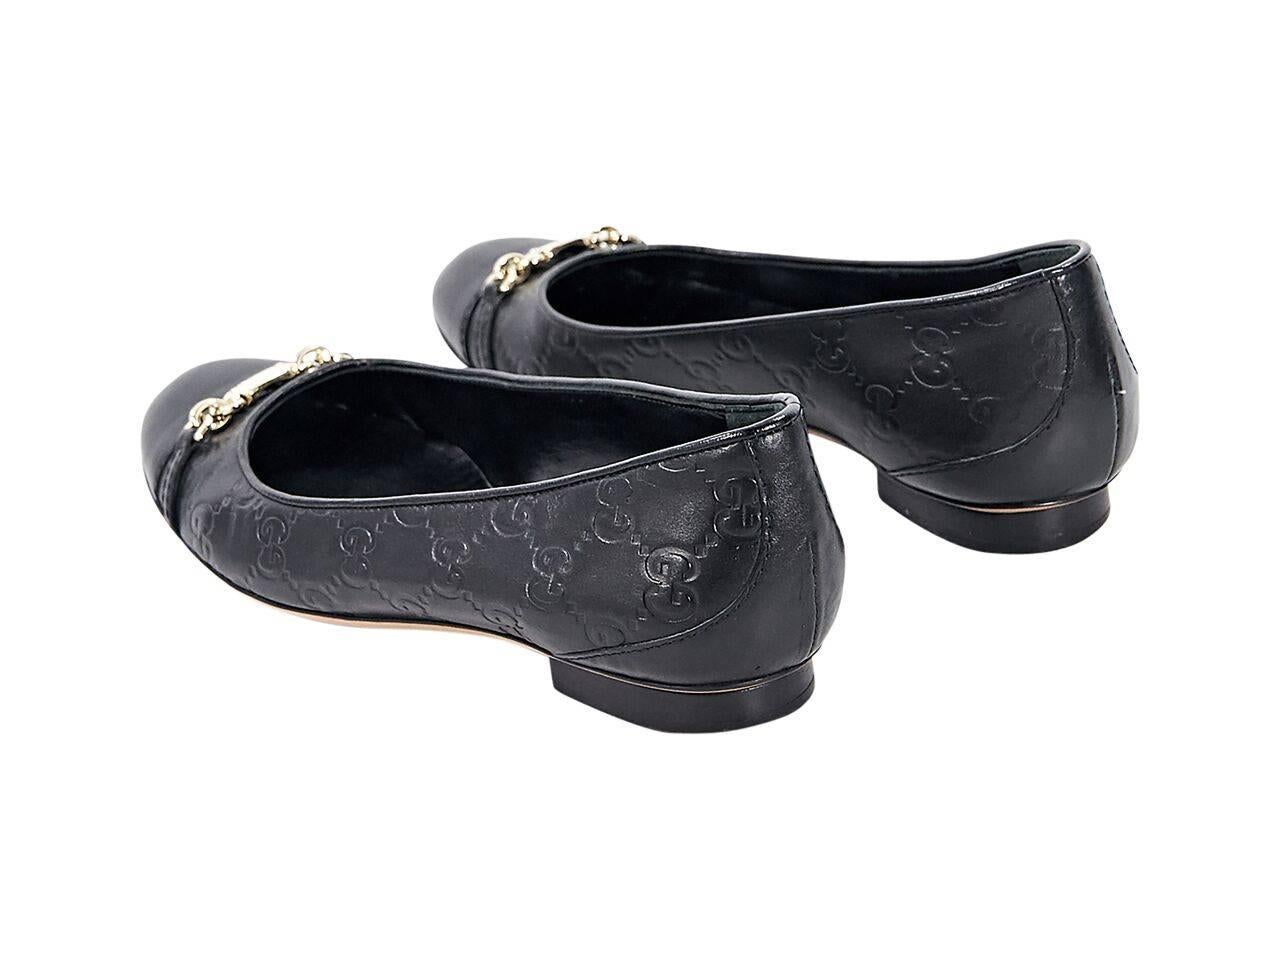 Product details:  Black leather GG embossed ballet flats by Gucci.  Horsebit detail accents vamp.  Round toe.  Slip-on style.  Goldtone hardware. 
Condition: Pre-owned. Very good.
Est. Retail $ 528.00